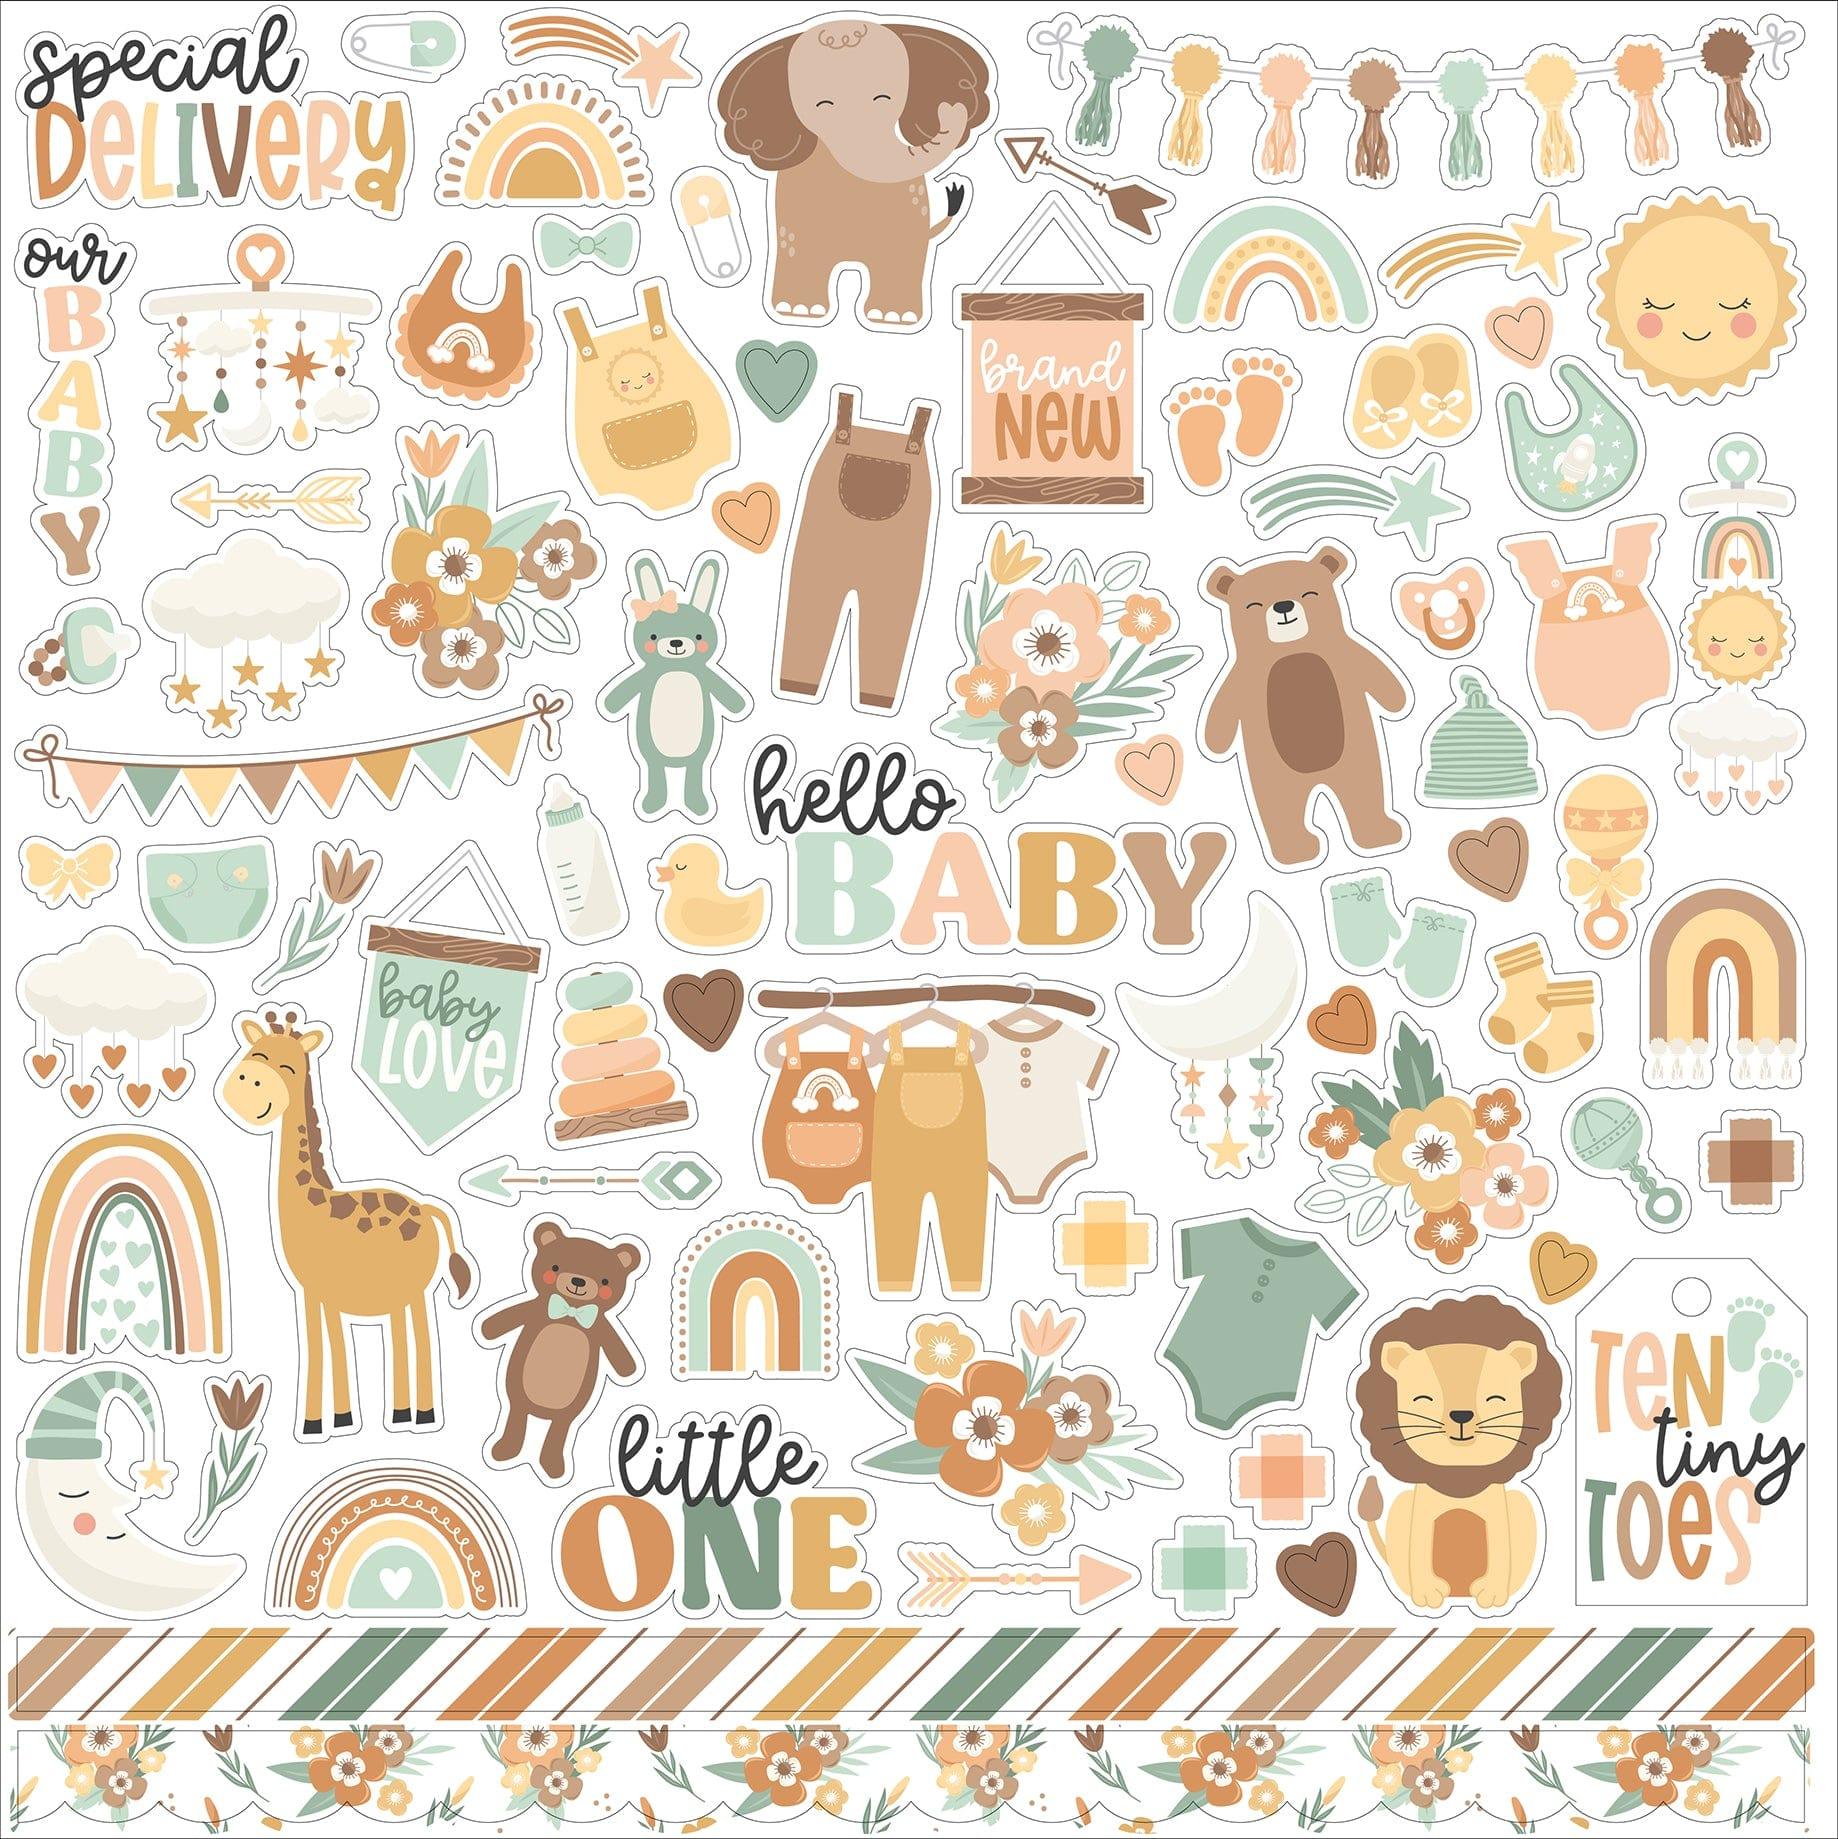 Our Baby Collection 12 x 12 Scrapbook Sticker Sheet by Echo Park Paper - Scrapbook Supply Companies